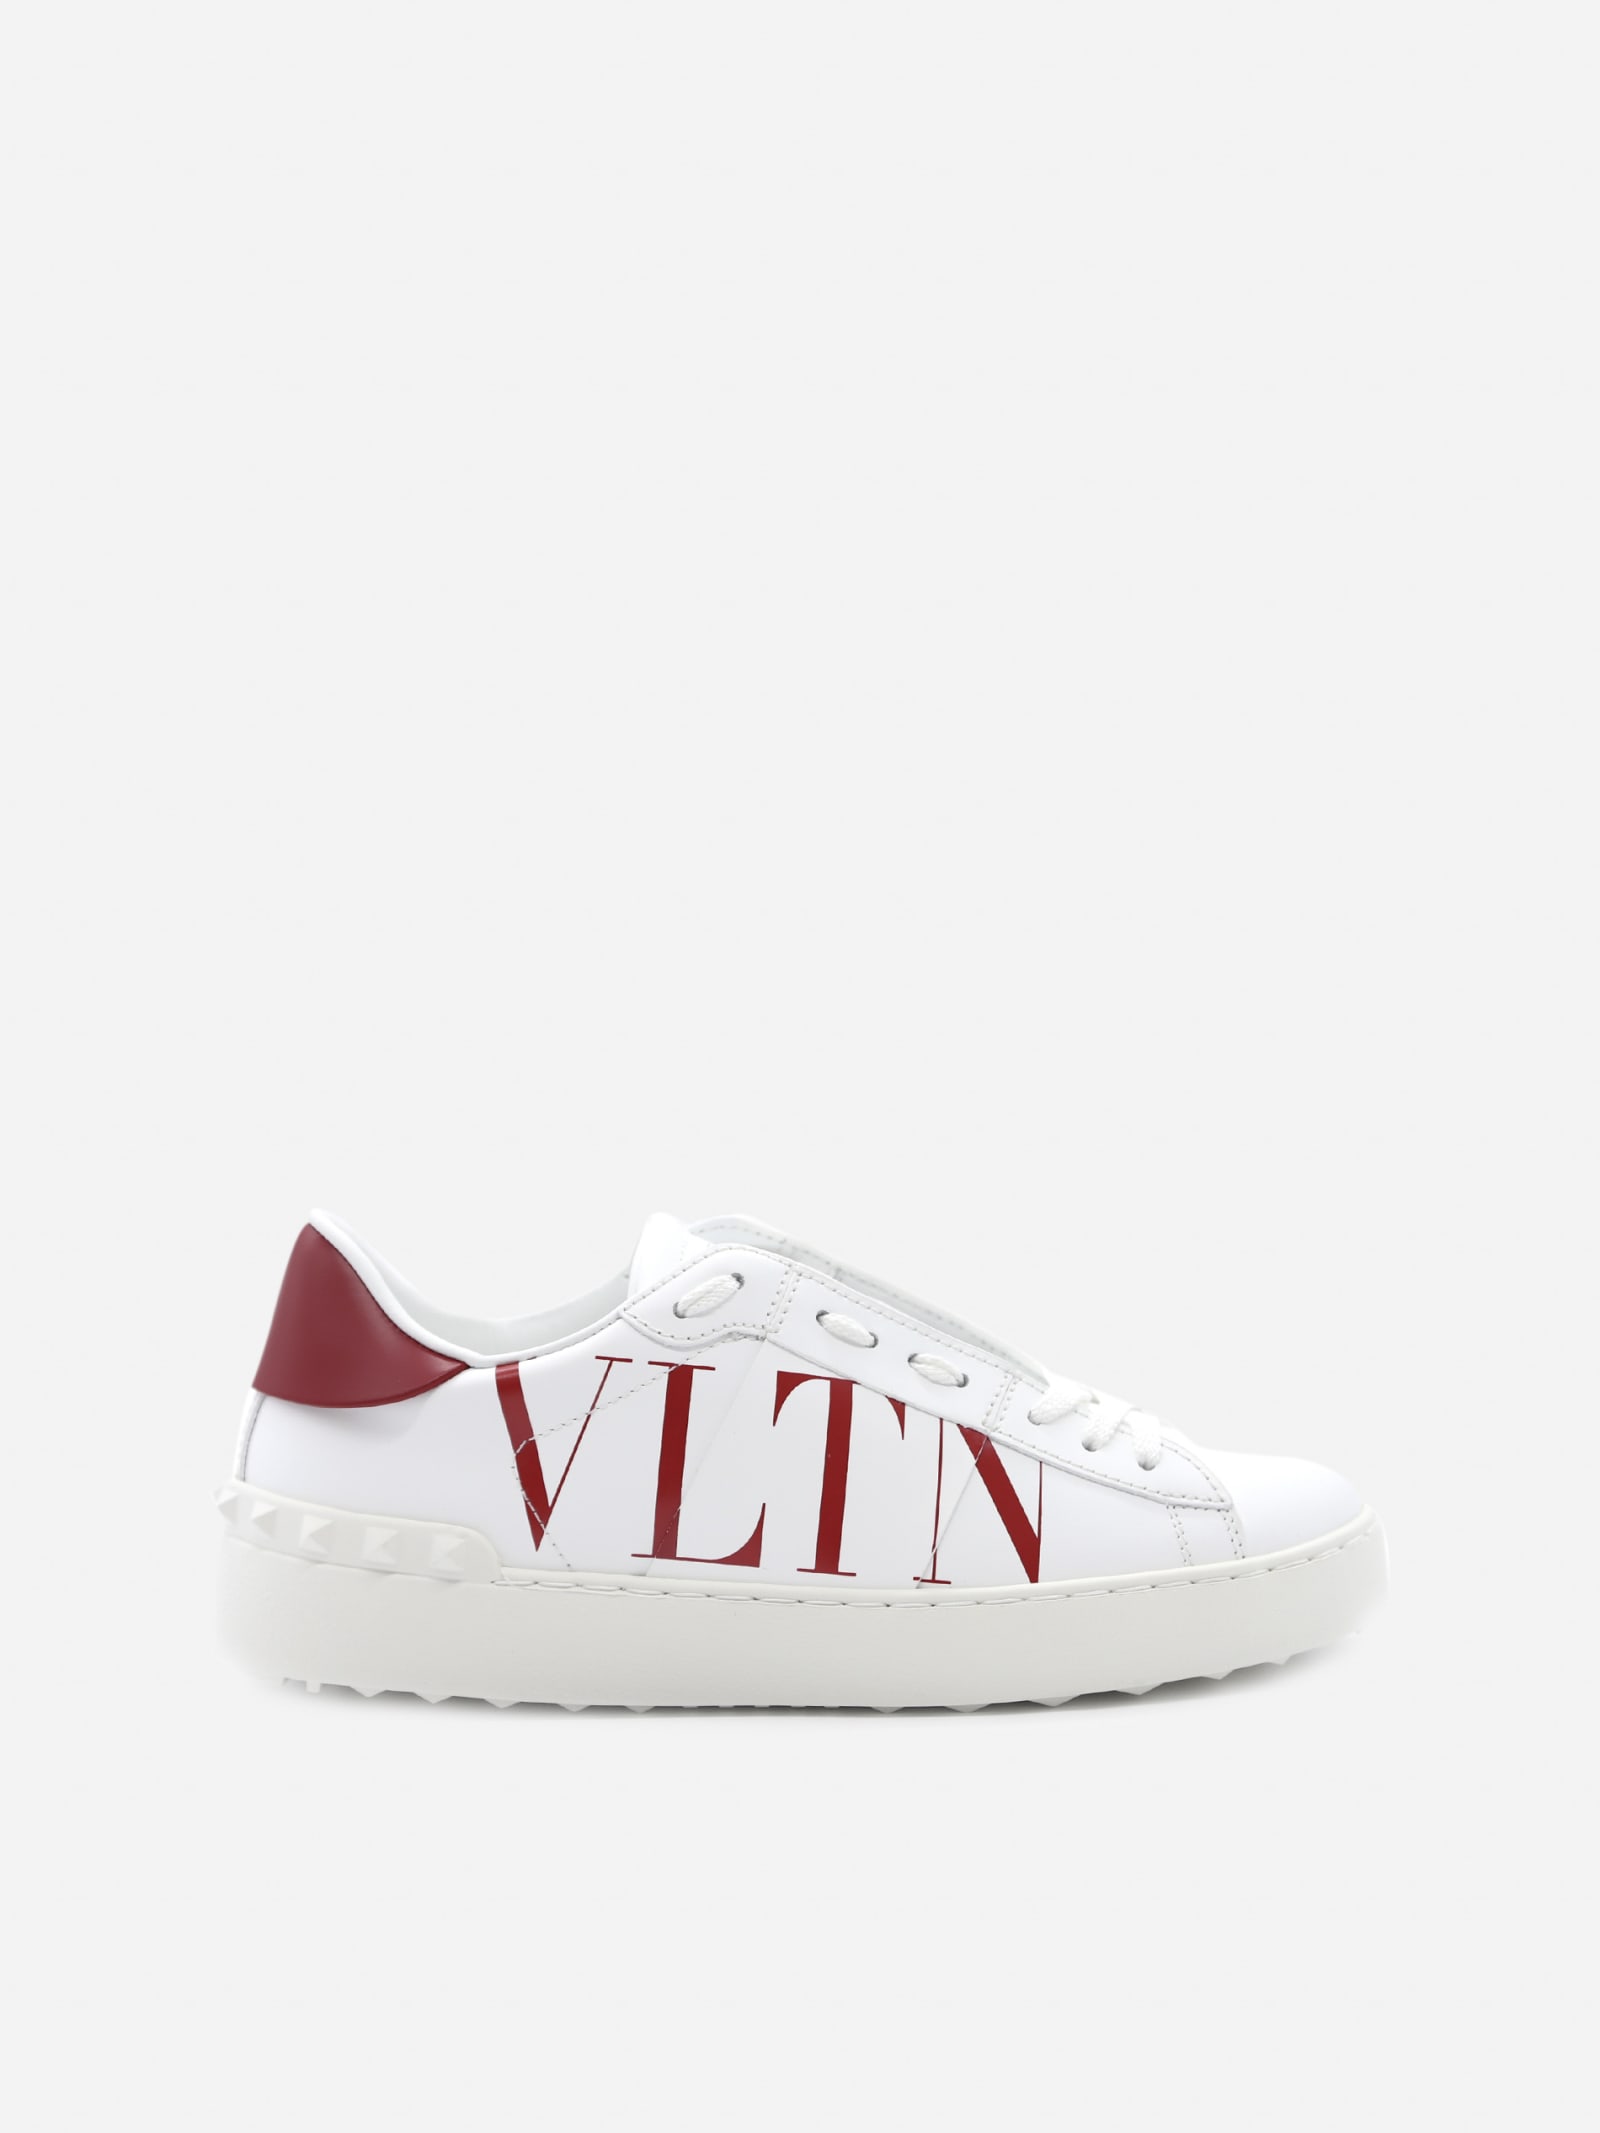 Valentino Garavani Open Sneakers In Leather With Contrasting Vltn Print